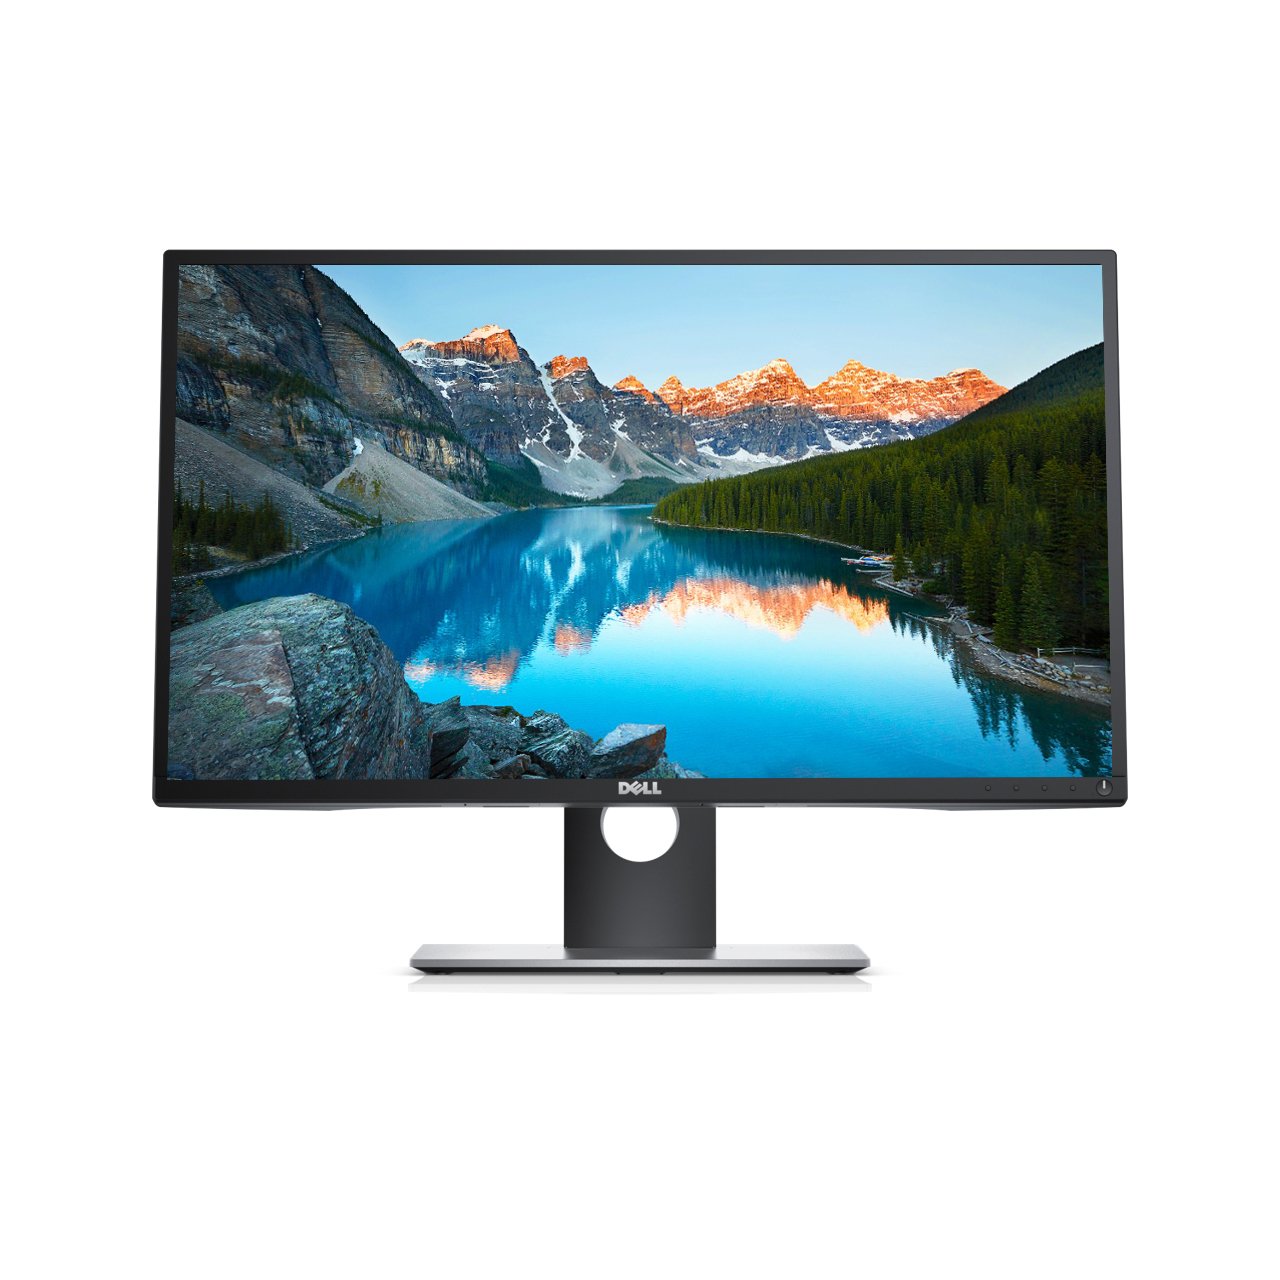 Dell Professional P2017H 19.5" Screen LED-Lit Monitor